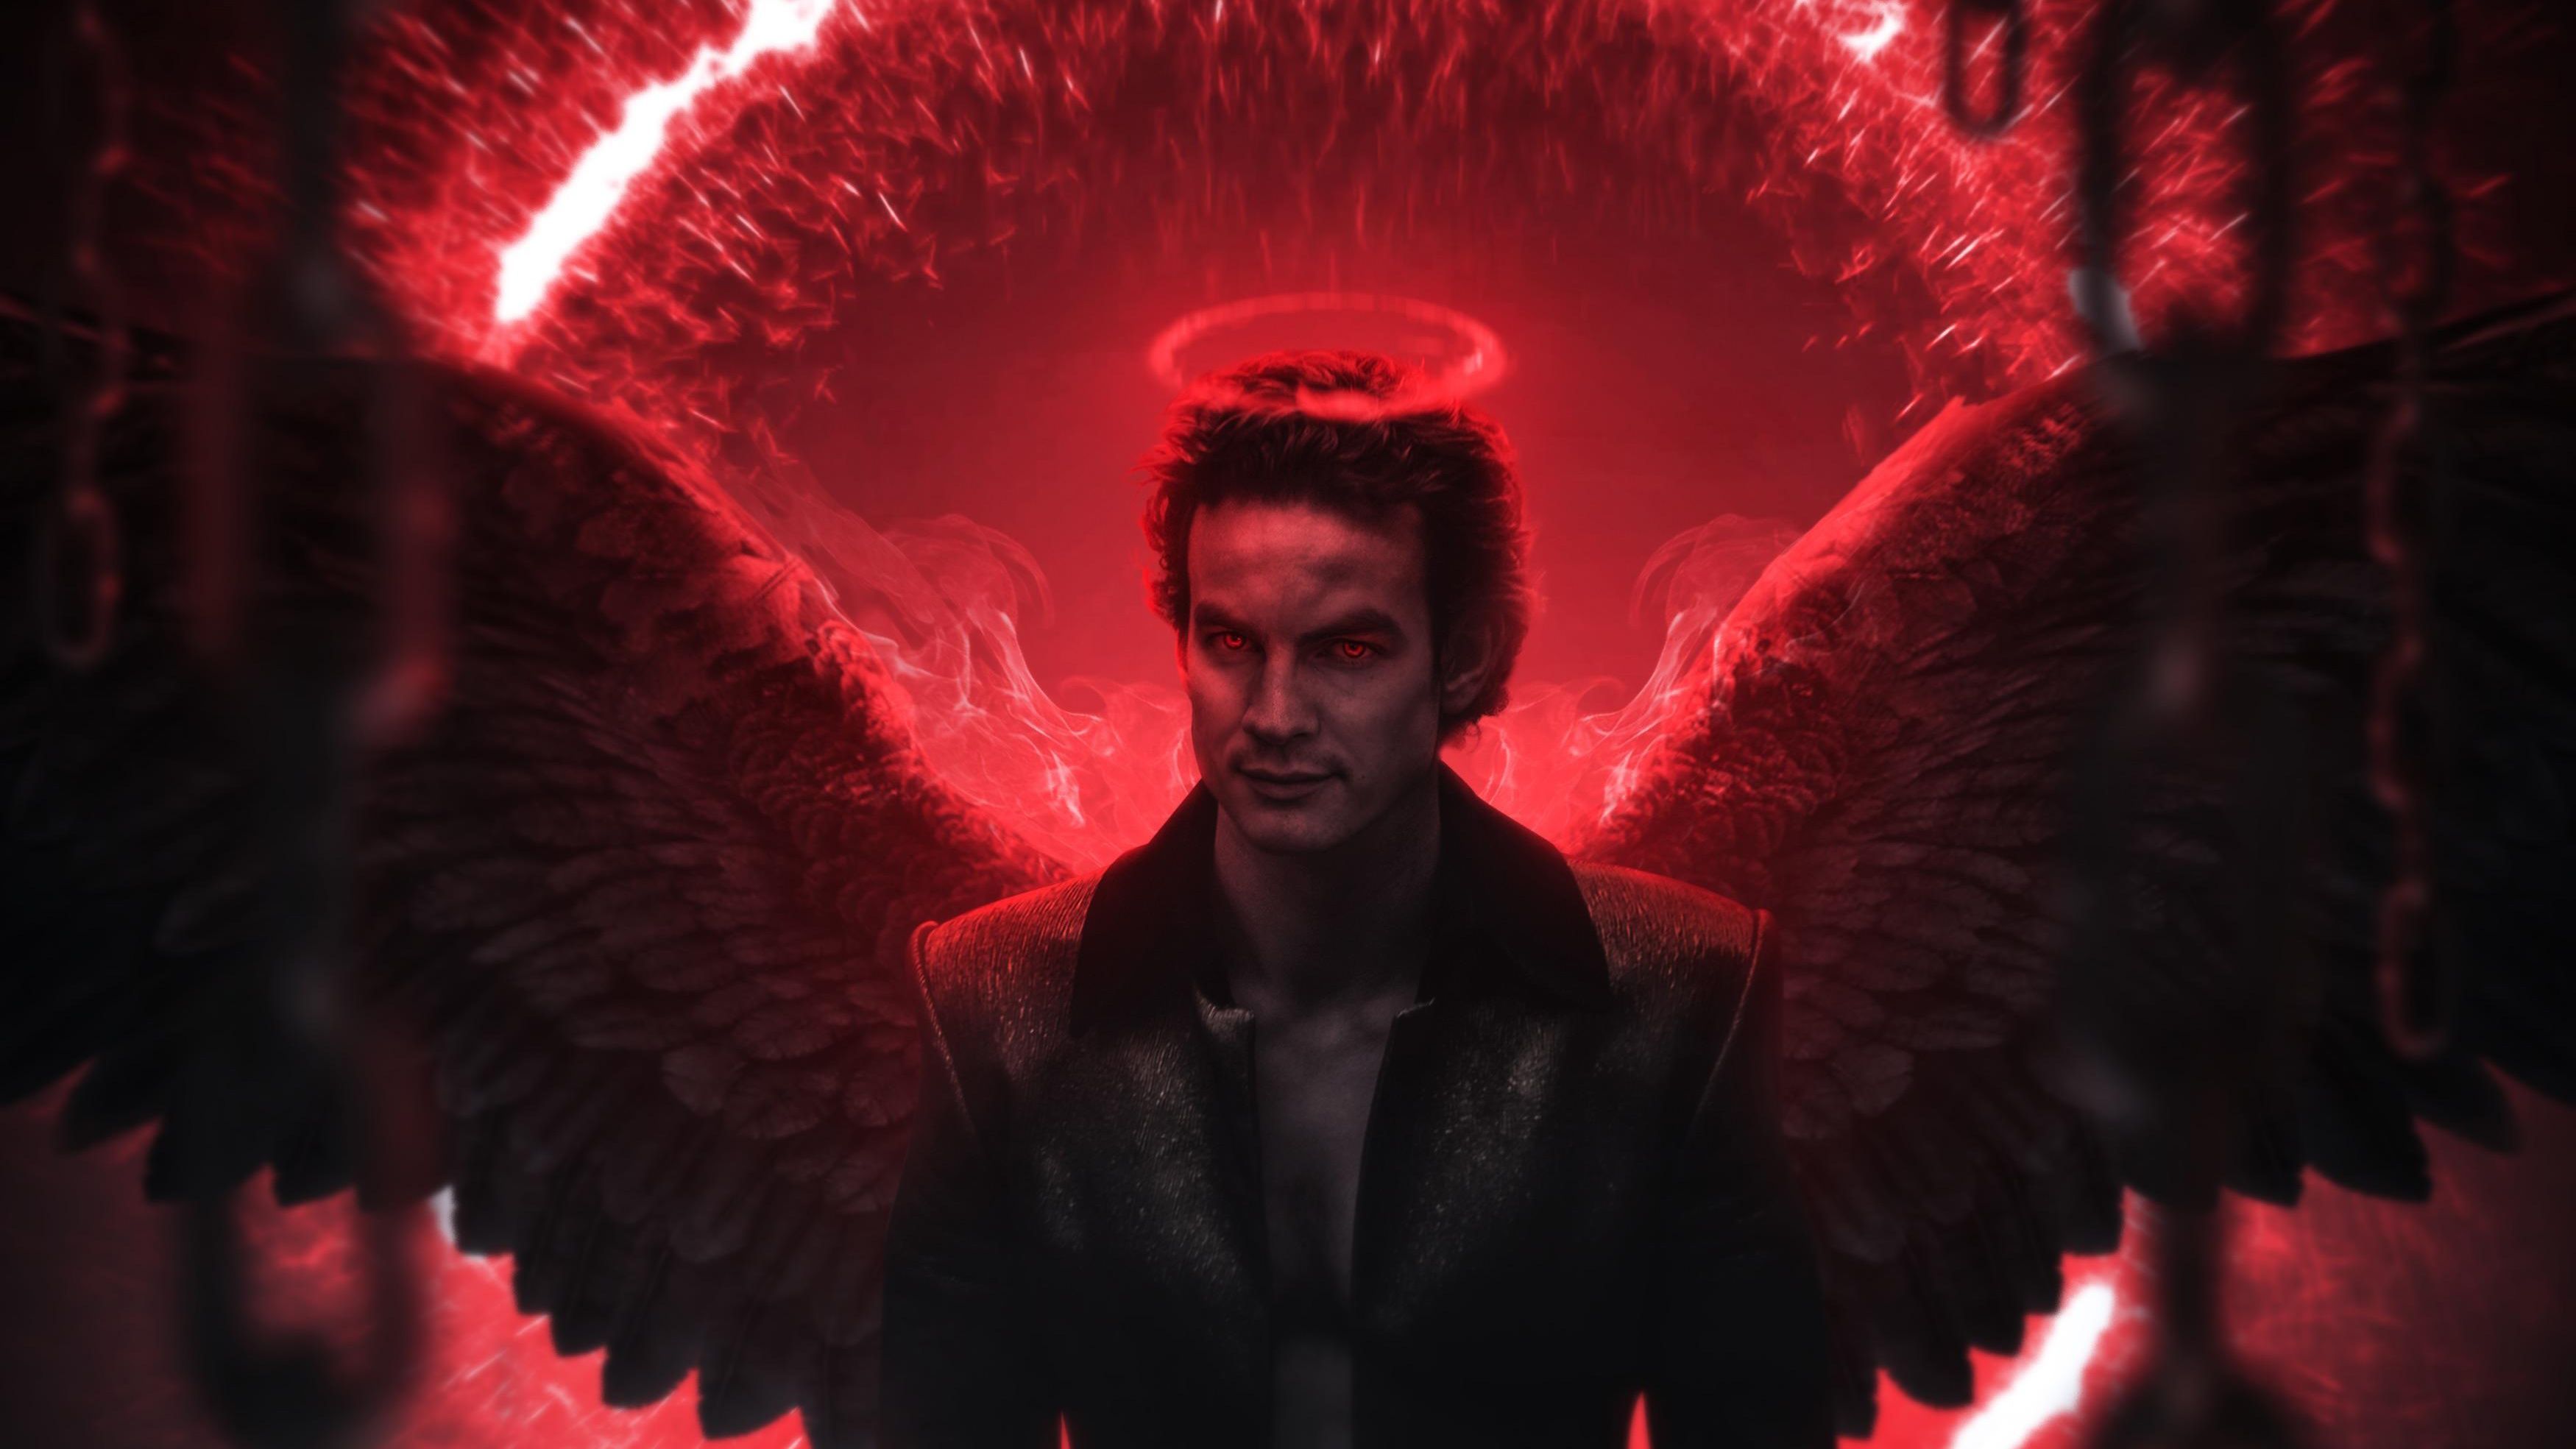 lucifer wallpaper, what did you think by FIS4WOEI on DeviantArt